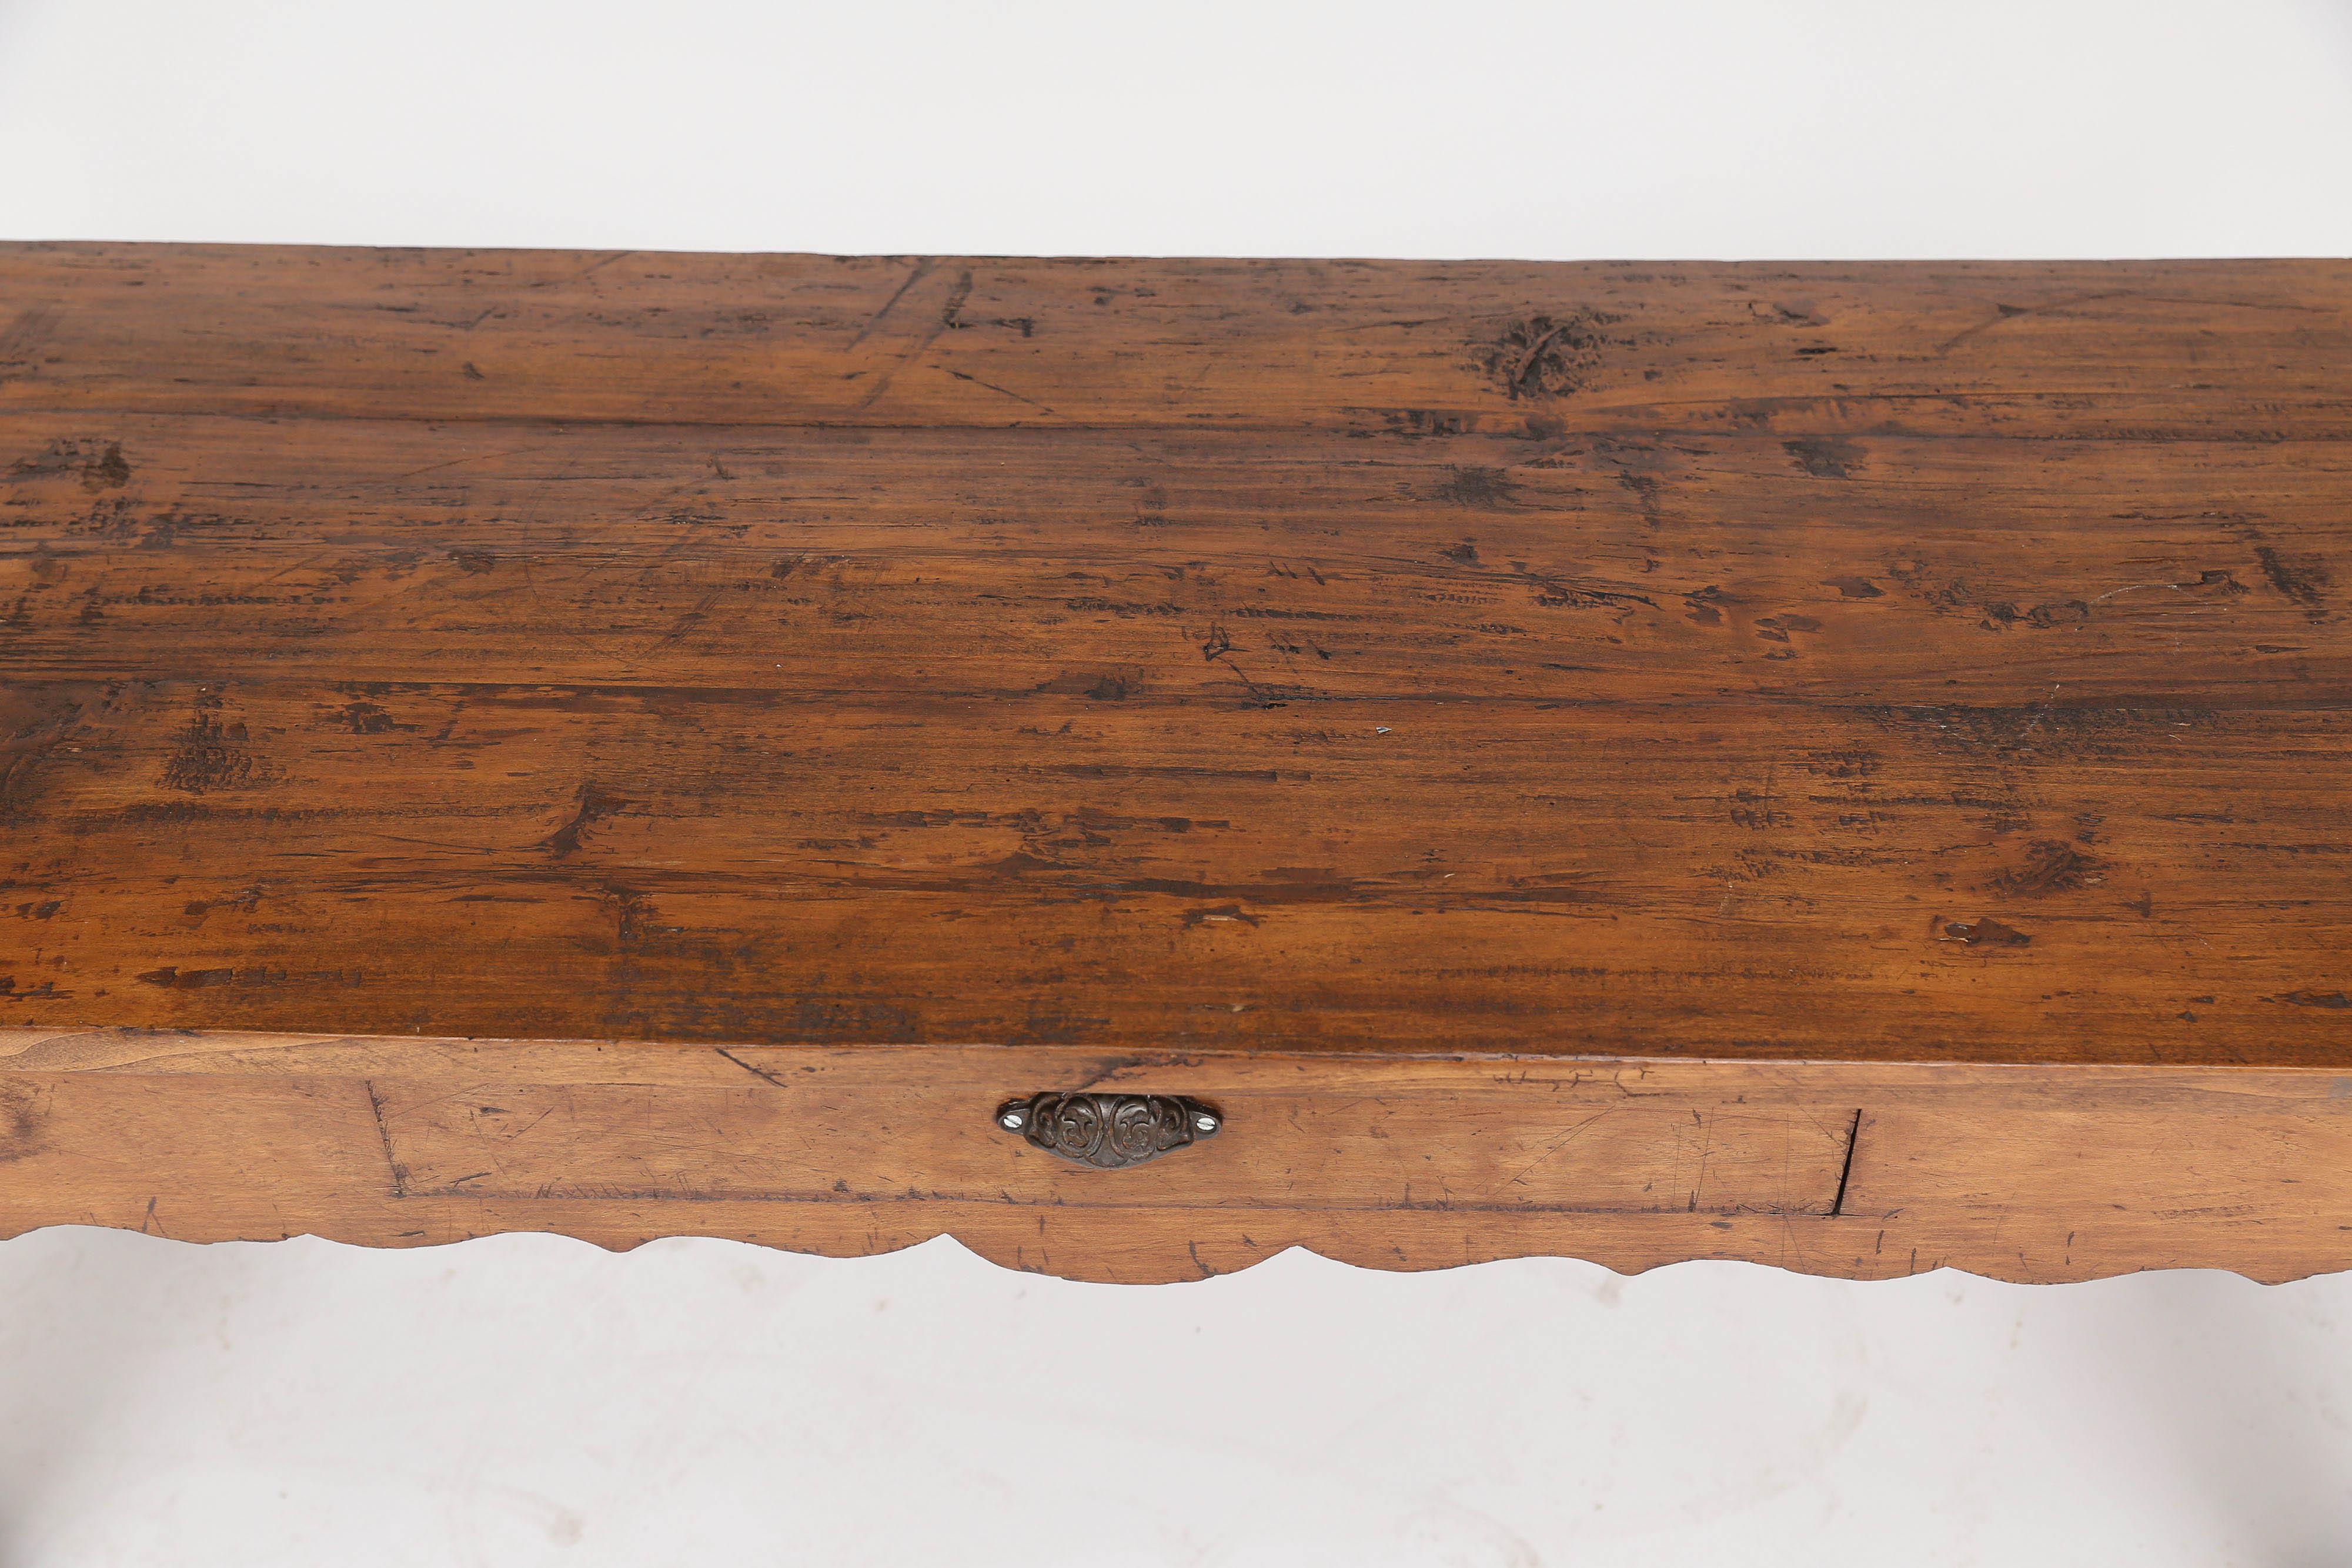 Fabulous French walnut butcher table, late 19th century. Presented as found, without the butcher block top, this piece would make a great entry table below a large mirror or coffee table. The sturdy construction, detailed apron on four sides and one